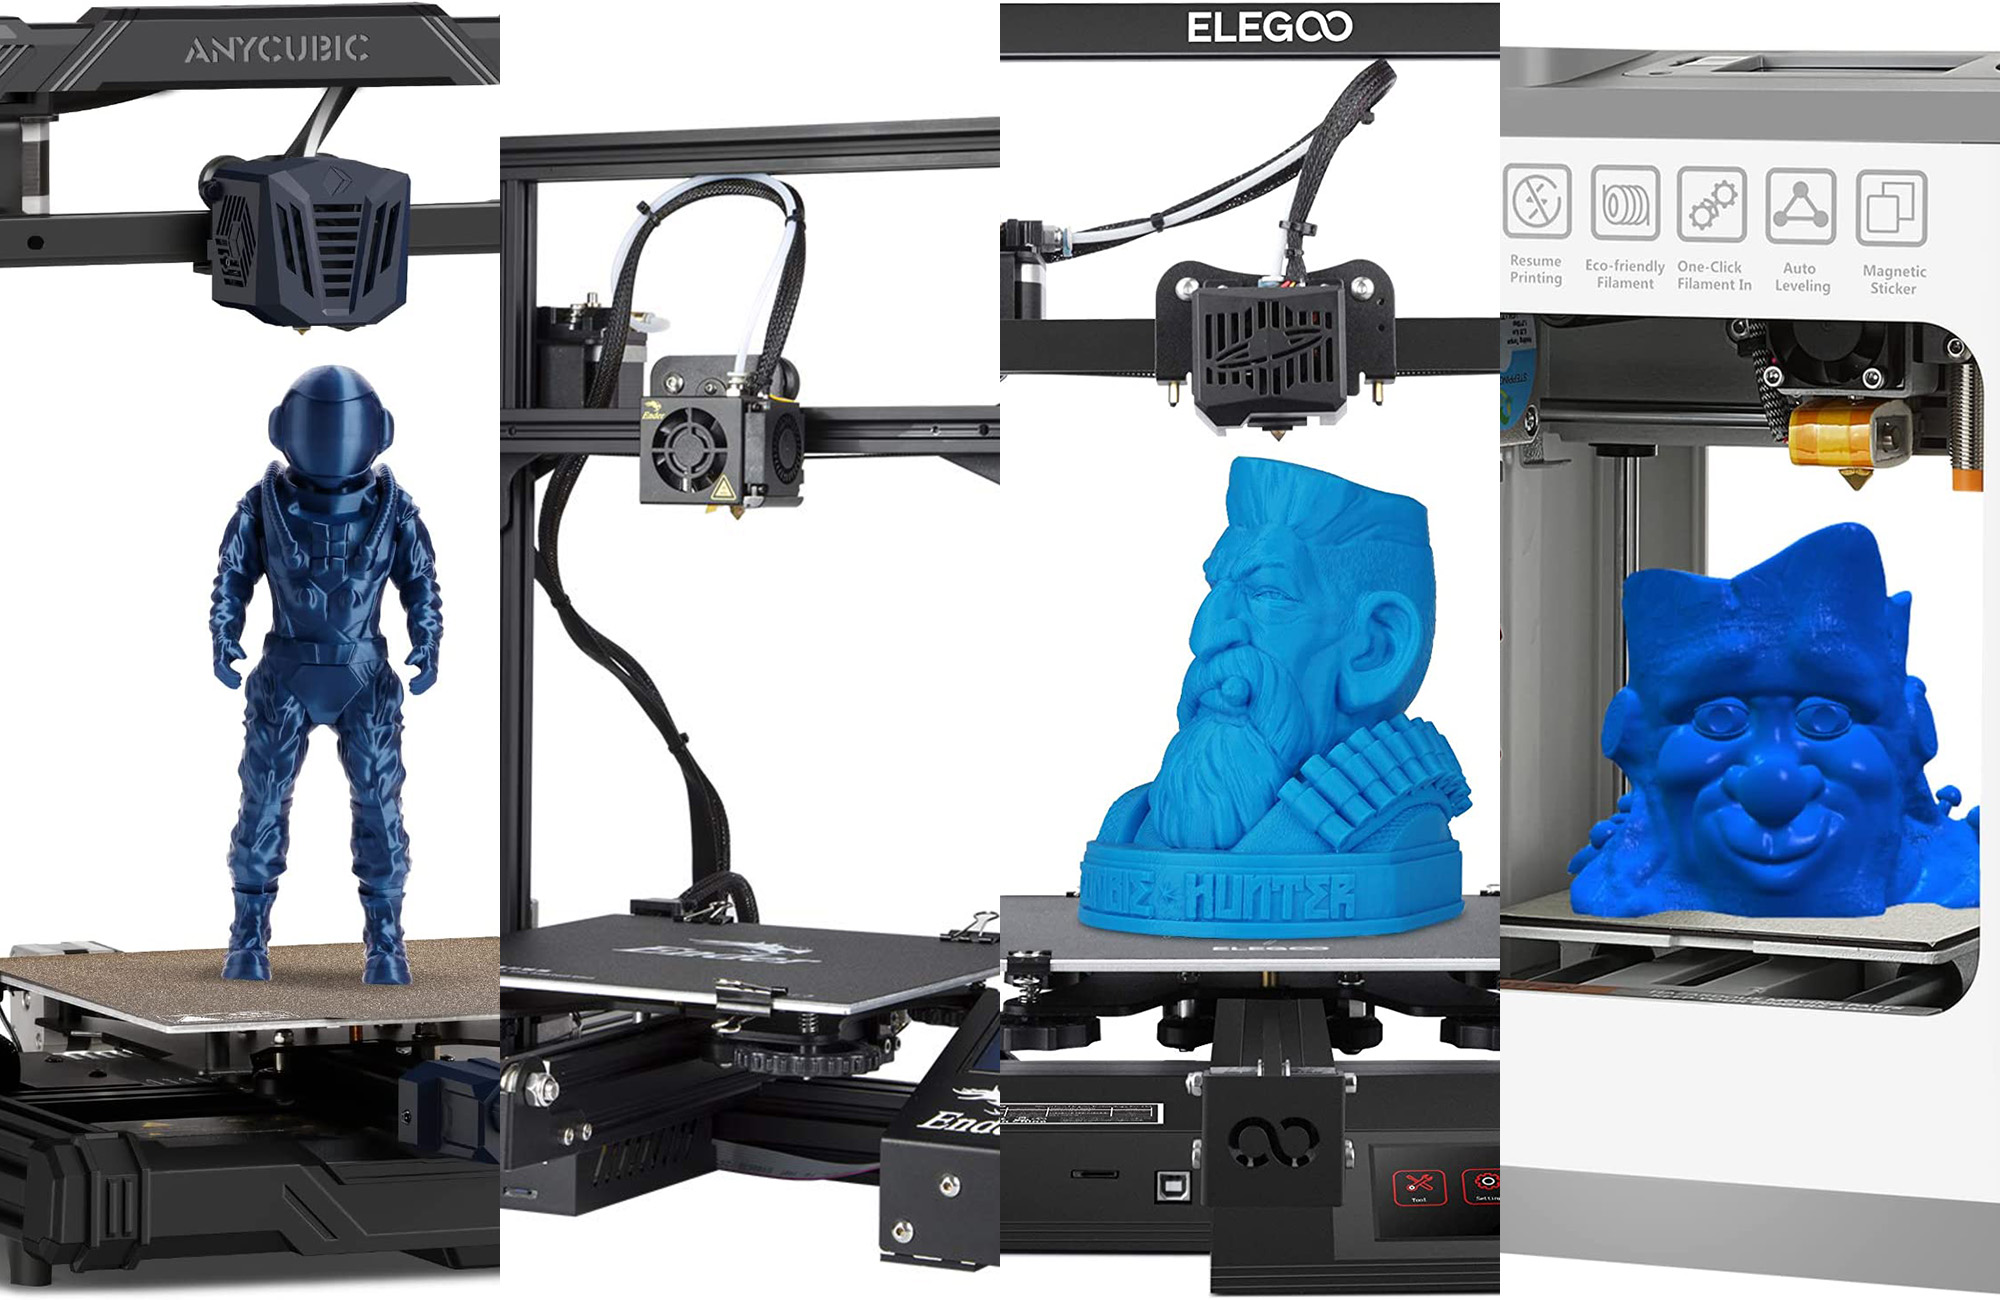 Create something new before Black Friday with these 3D printer deals on Amazon